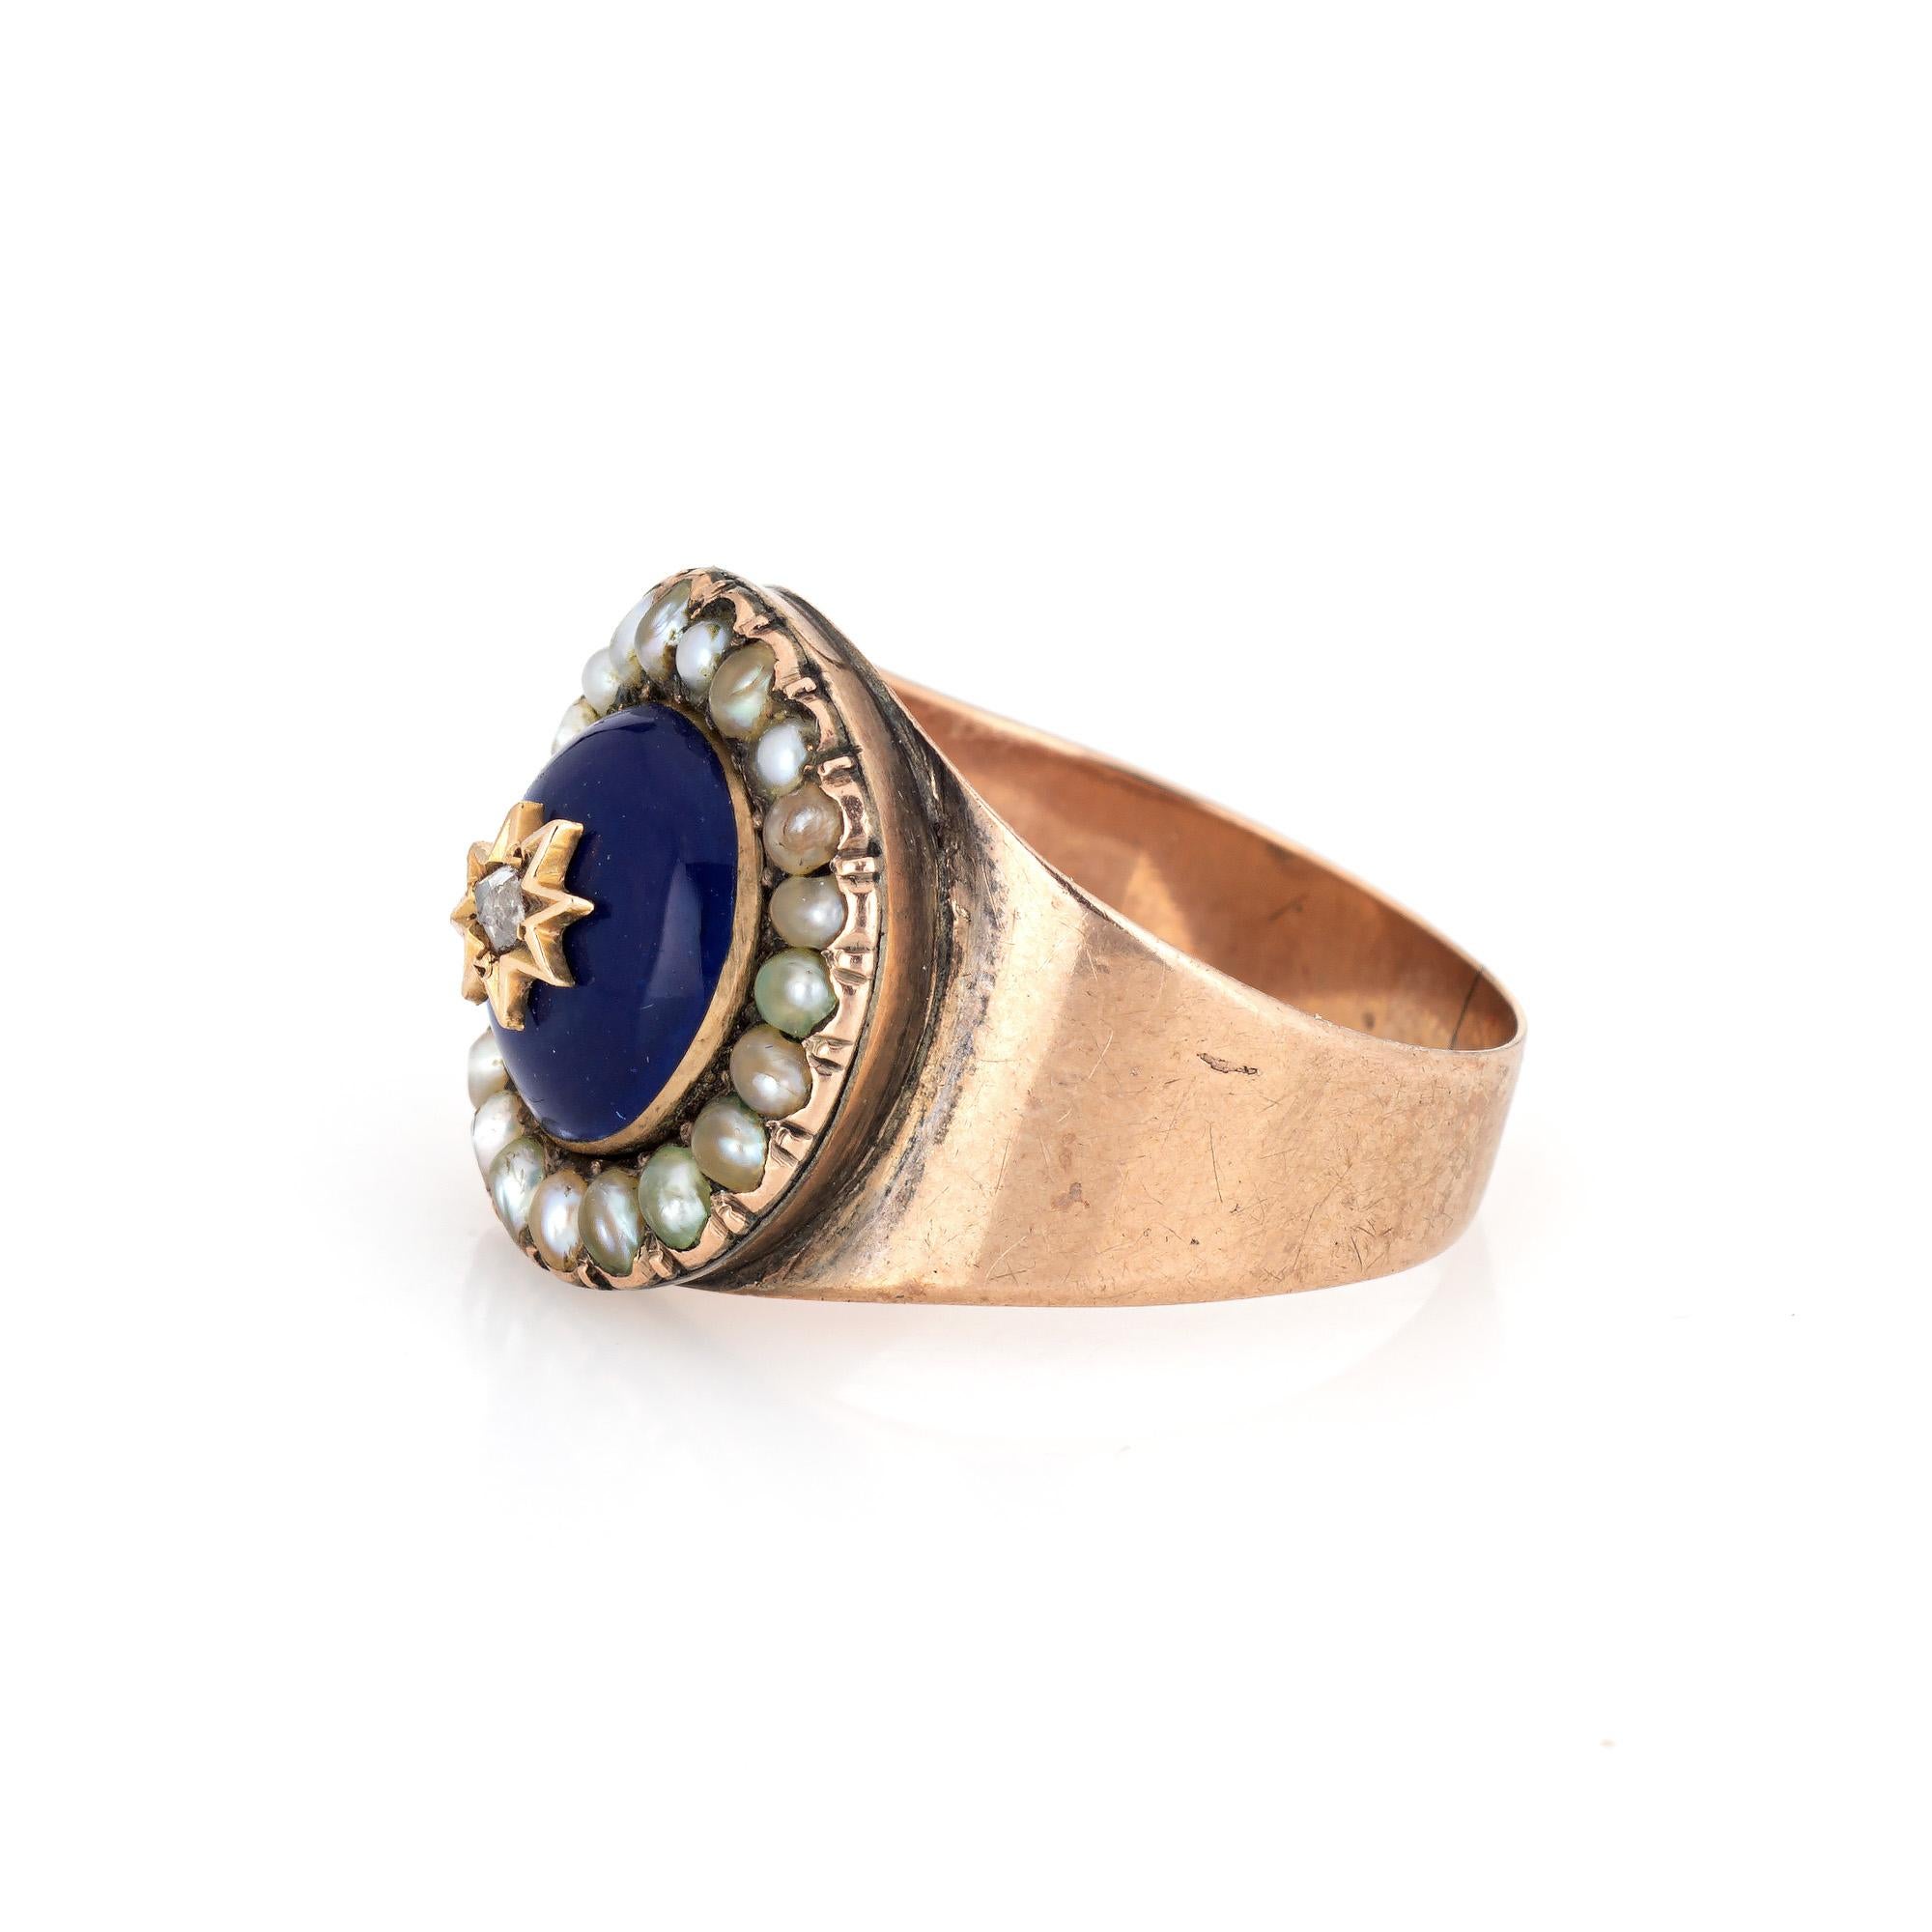 Antique Victorian Ring Diamond Pearl Blue Enamel 10k Rose Gold Signet Pinky 5 In Good Condition For Sale In Torrance, CA